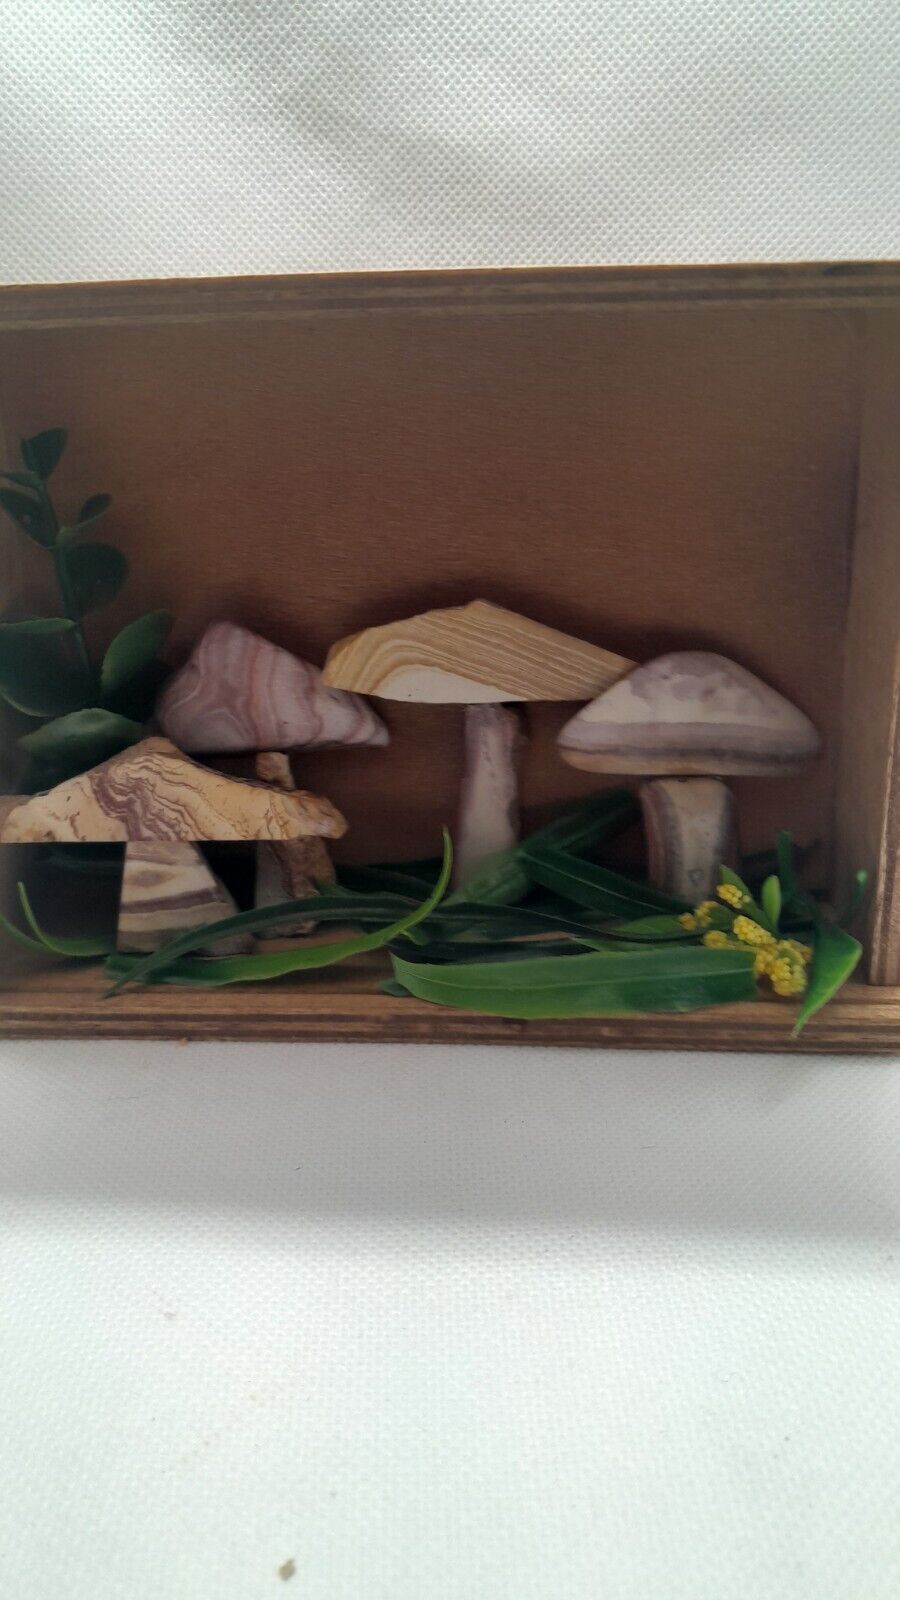 New Handcrafted Wonderstone (Banded Rhyolite) Fairy Toadstools In A Shadow Box.